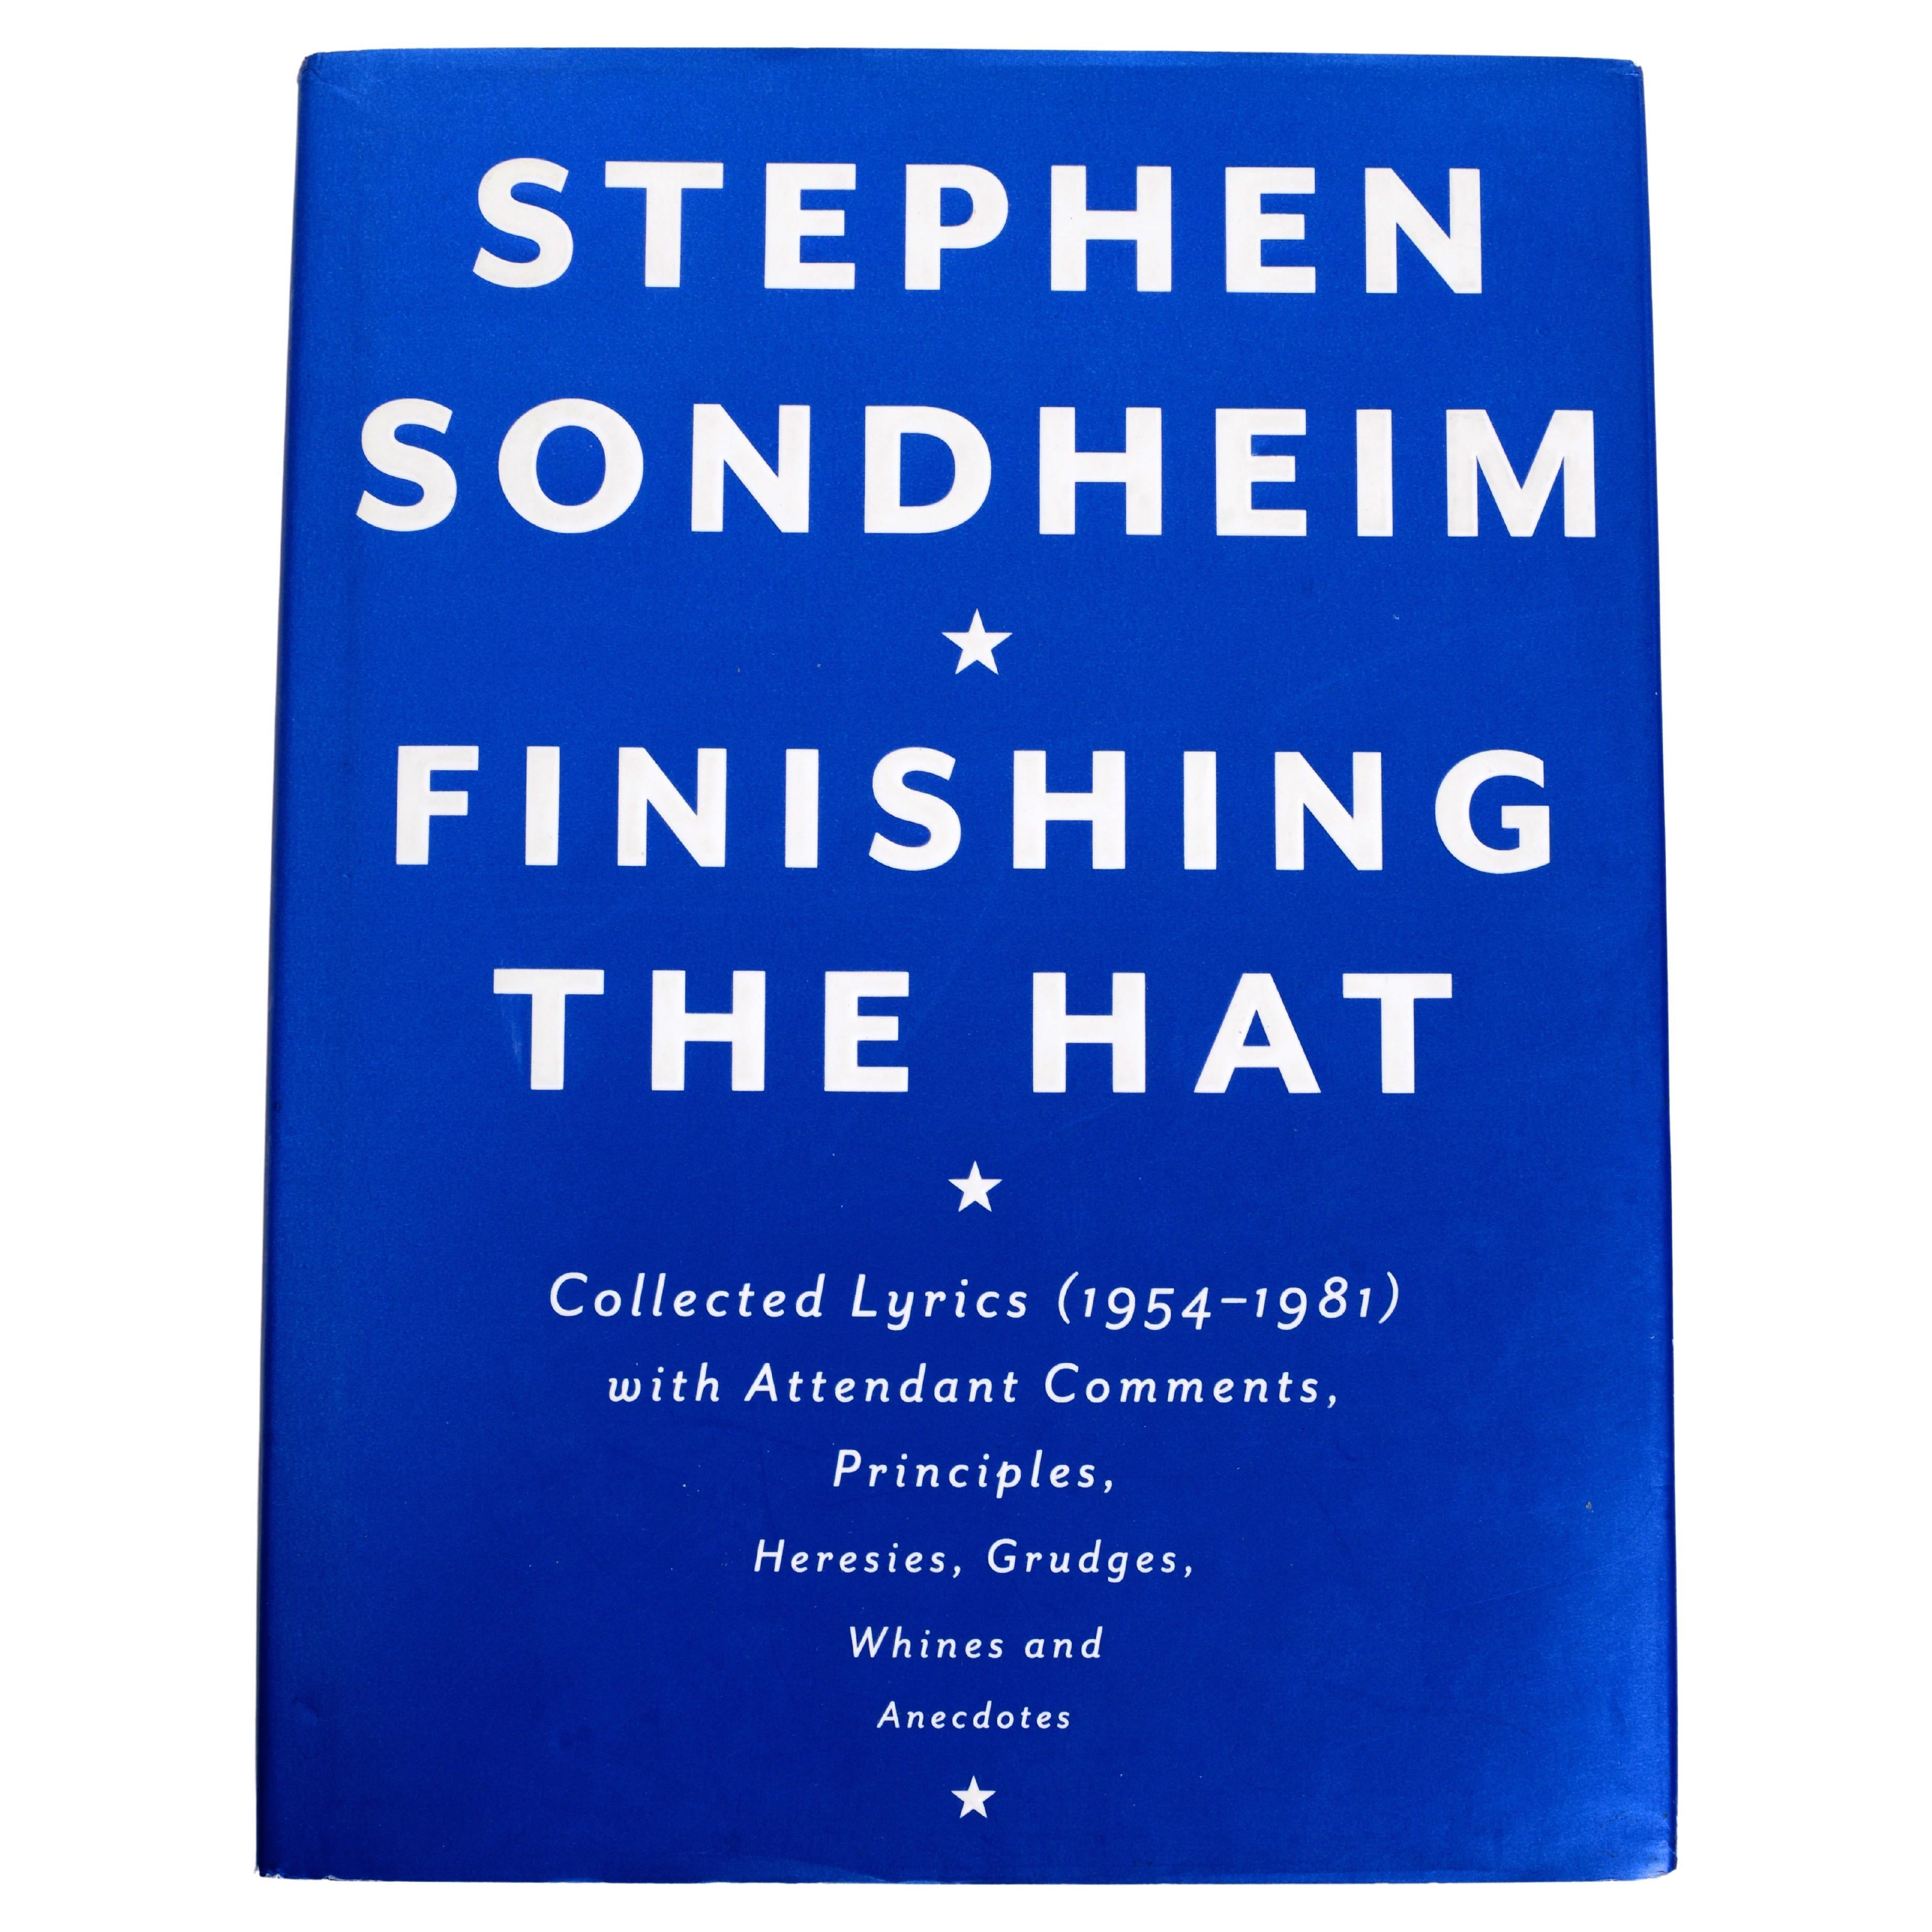 Finishing the Hat Collected Lyrics '1954-1981' Comments, by Stephen Sondheim